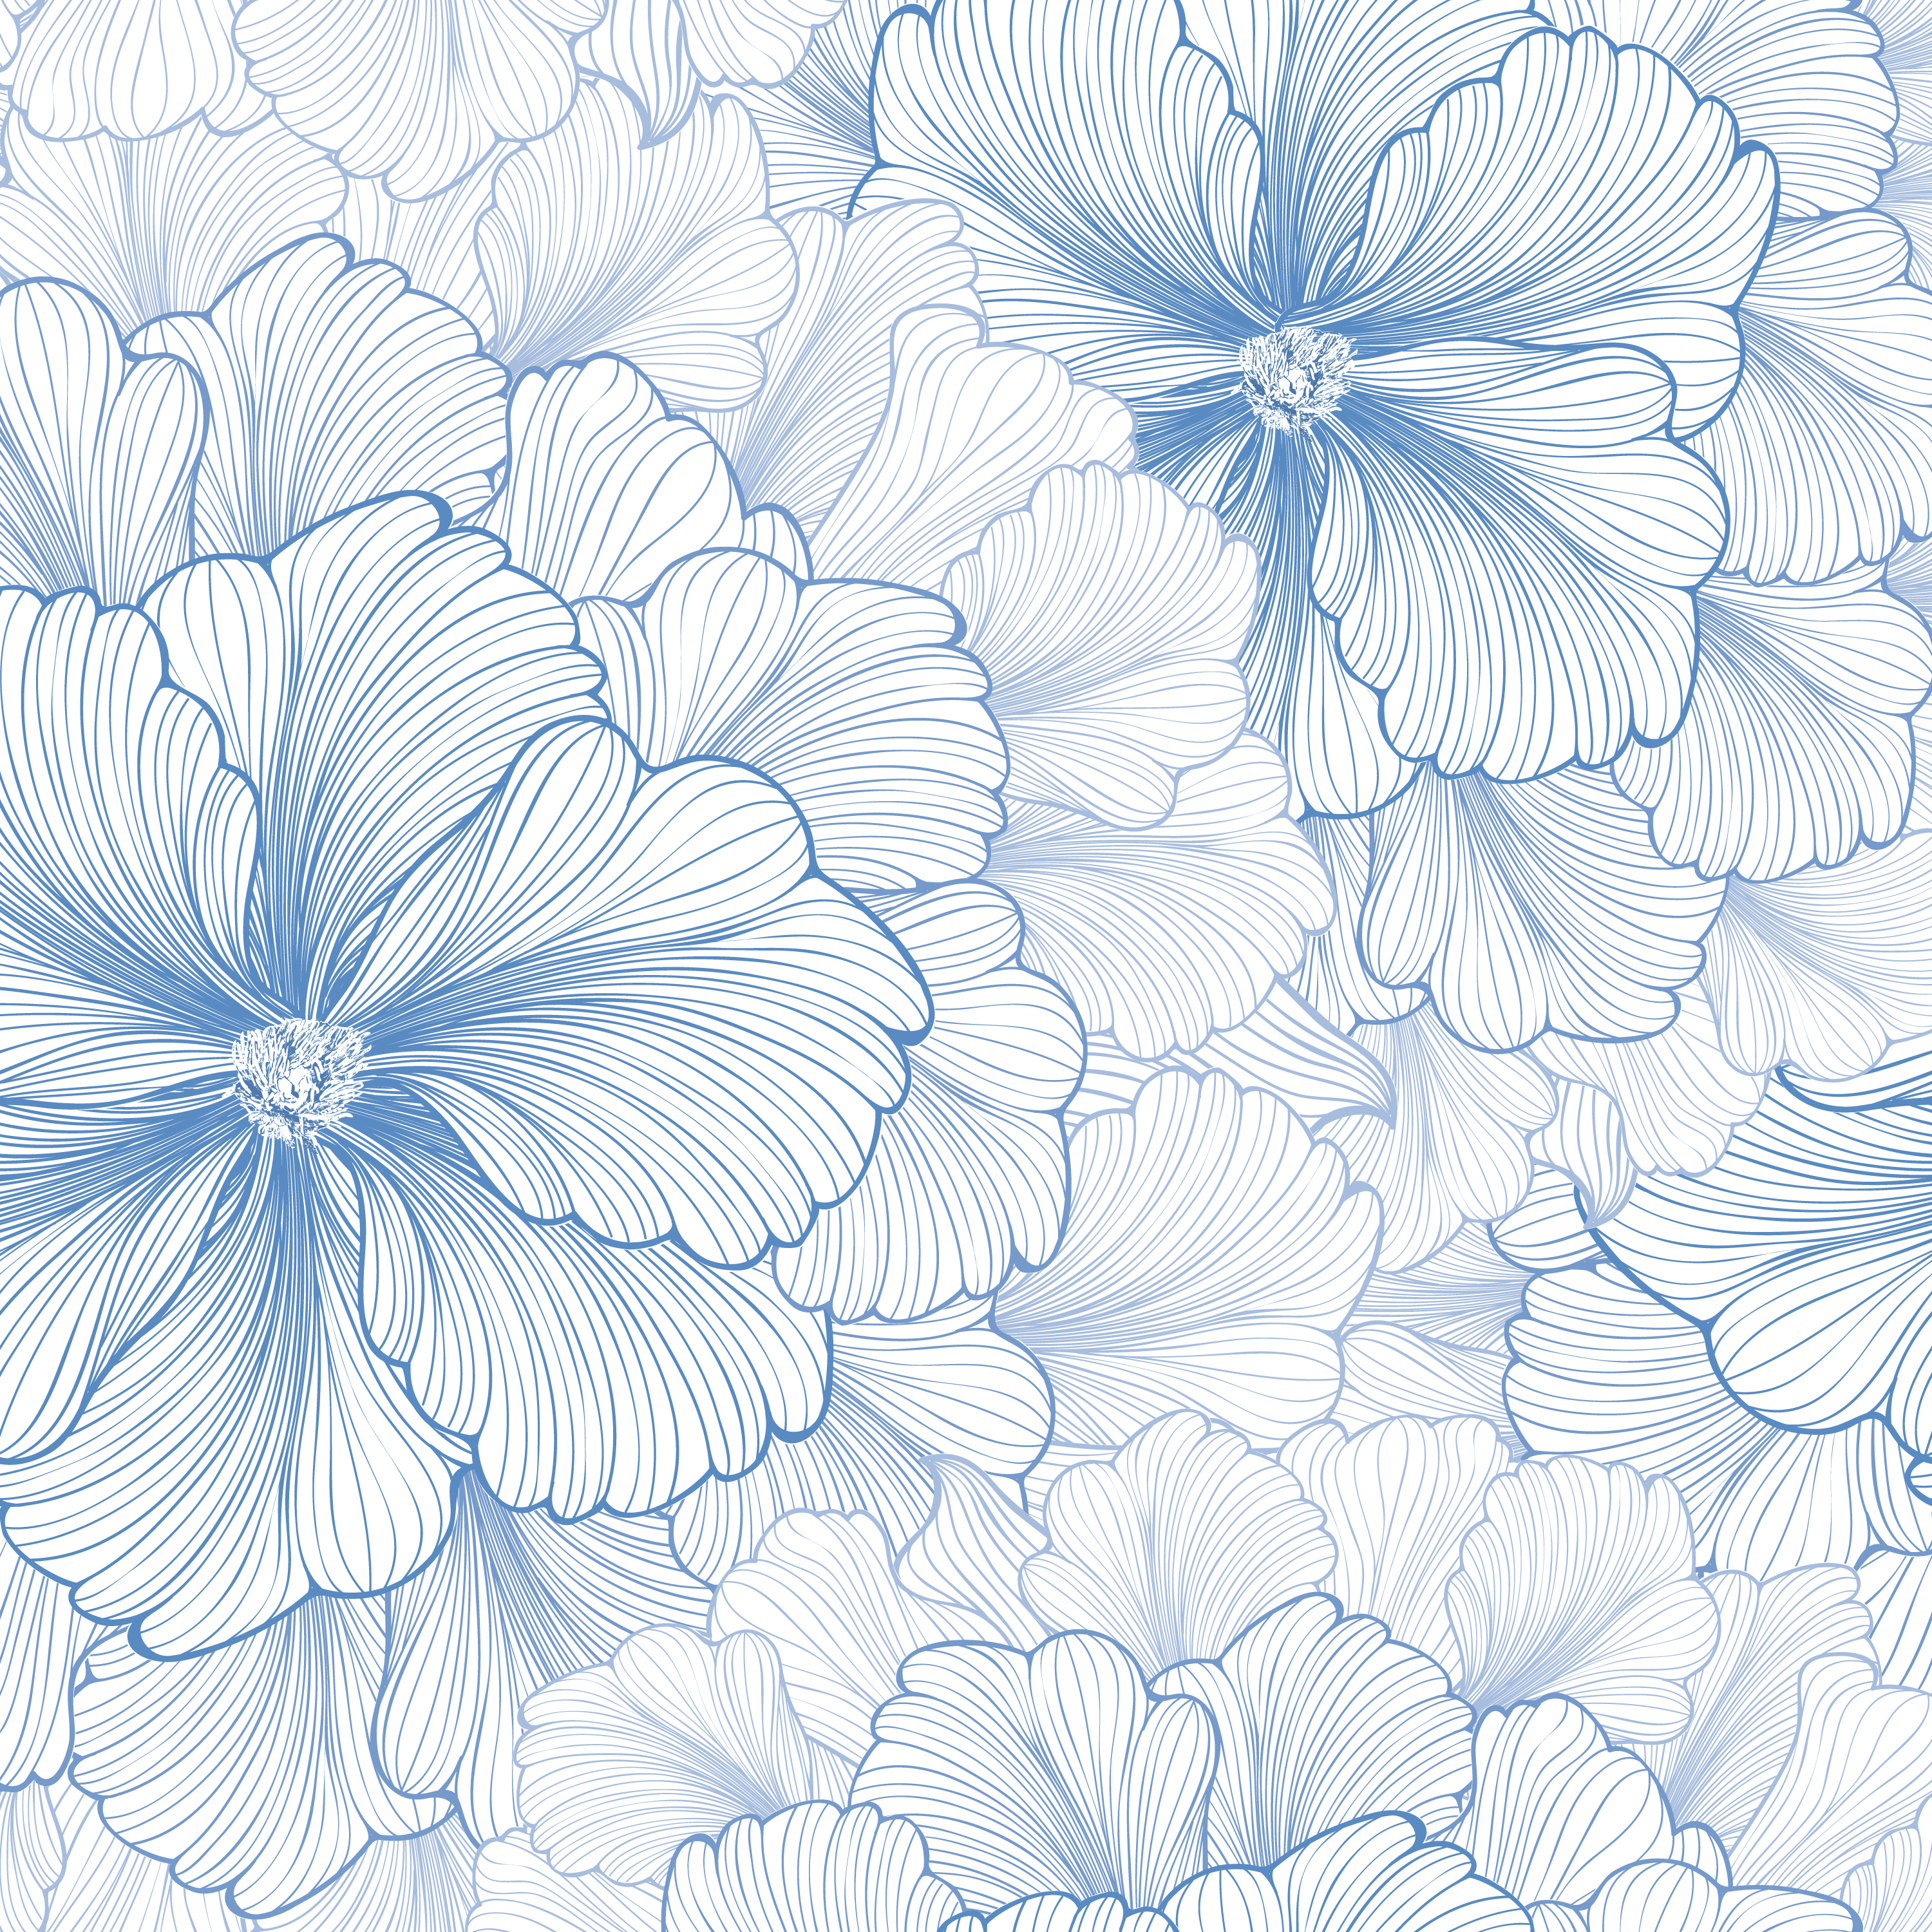 Download Floral background. Flower pattern. Flourish seamless texture 523942 - Download Free Vectors ...